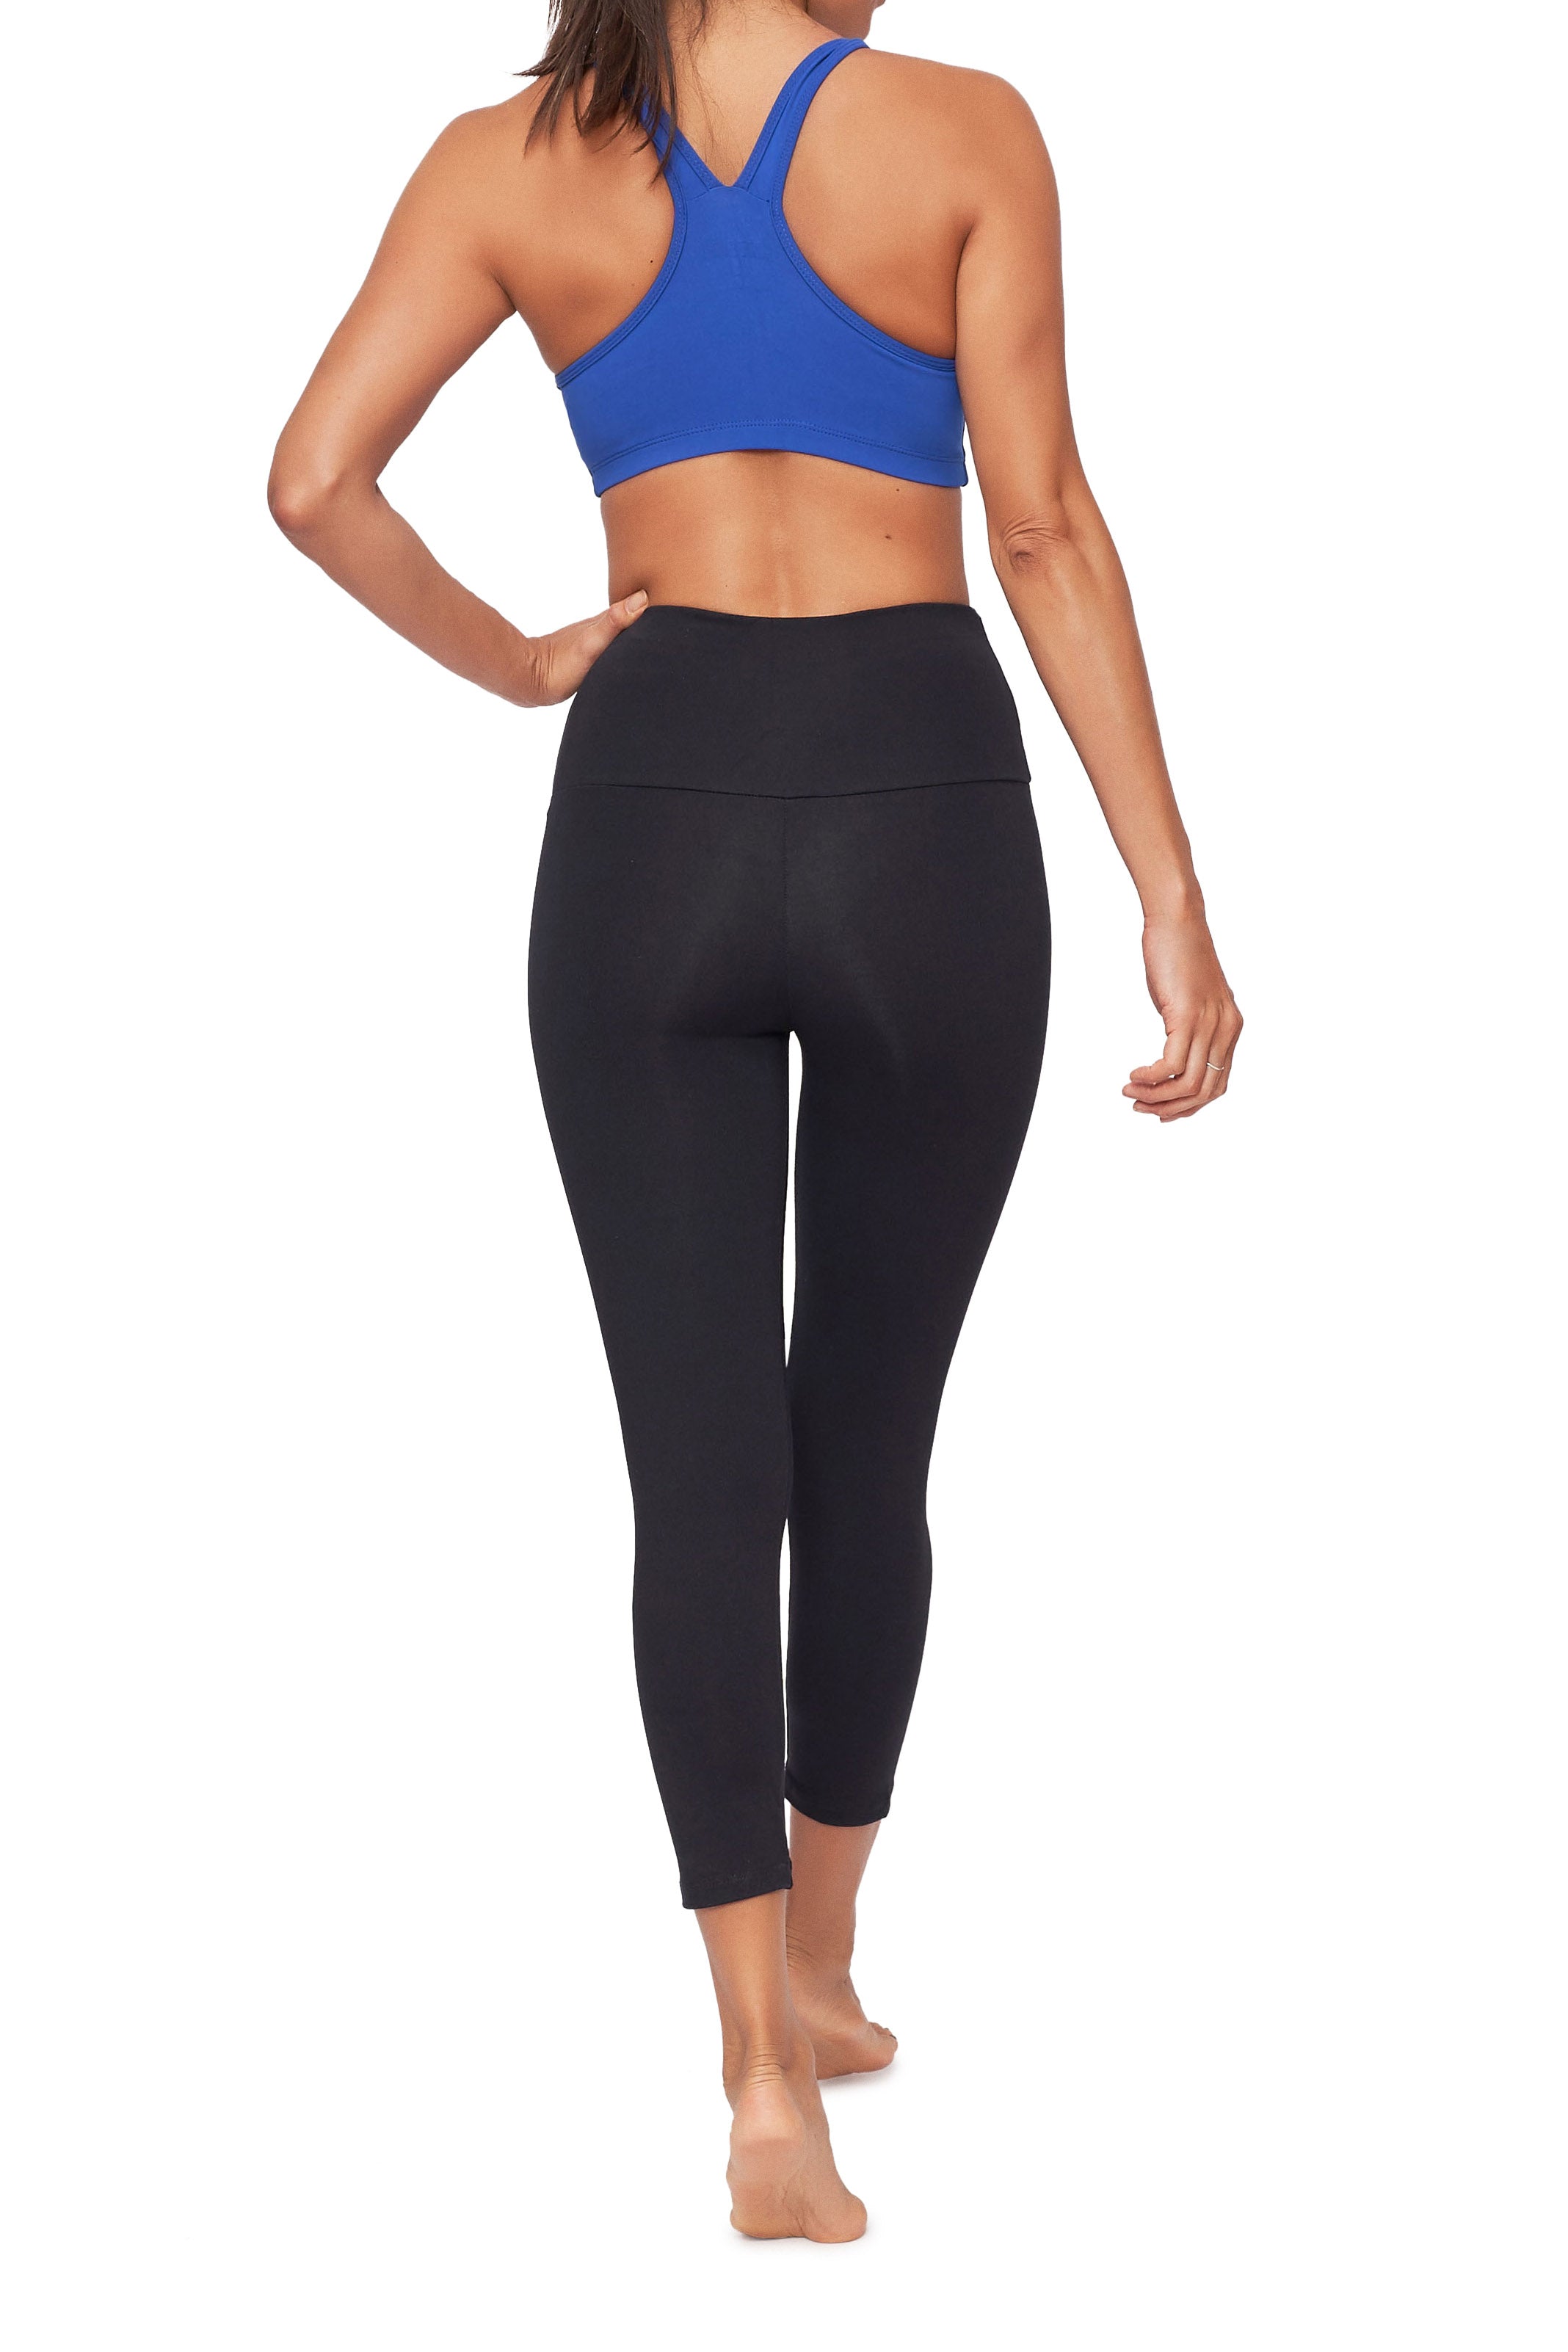 SJ Rainbow Collection High Waisted Butt Shaping Leggings (3/4 Mid-Calf – S  and J Luxury Fitness